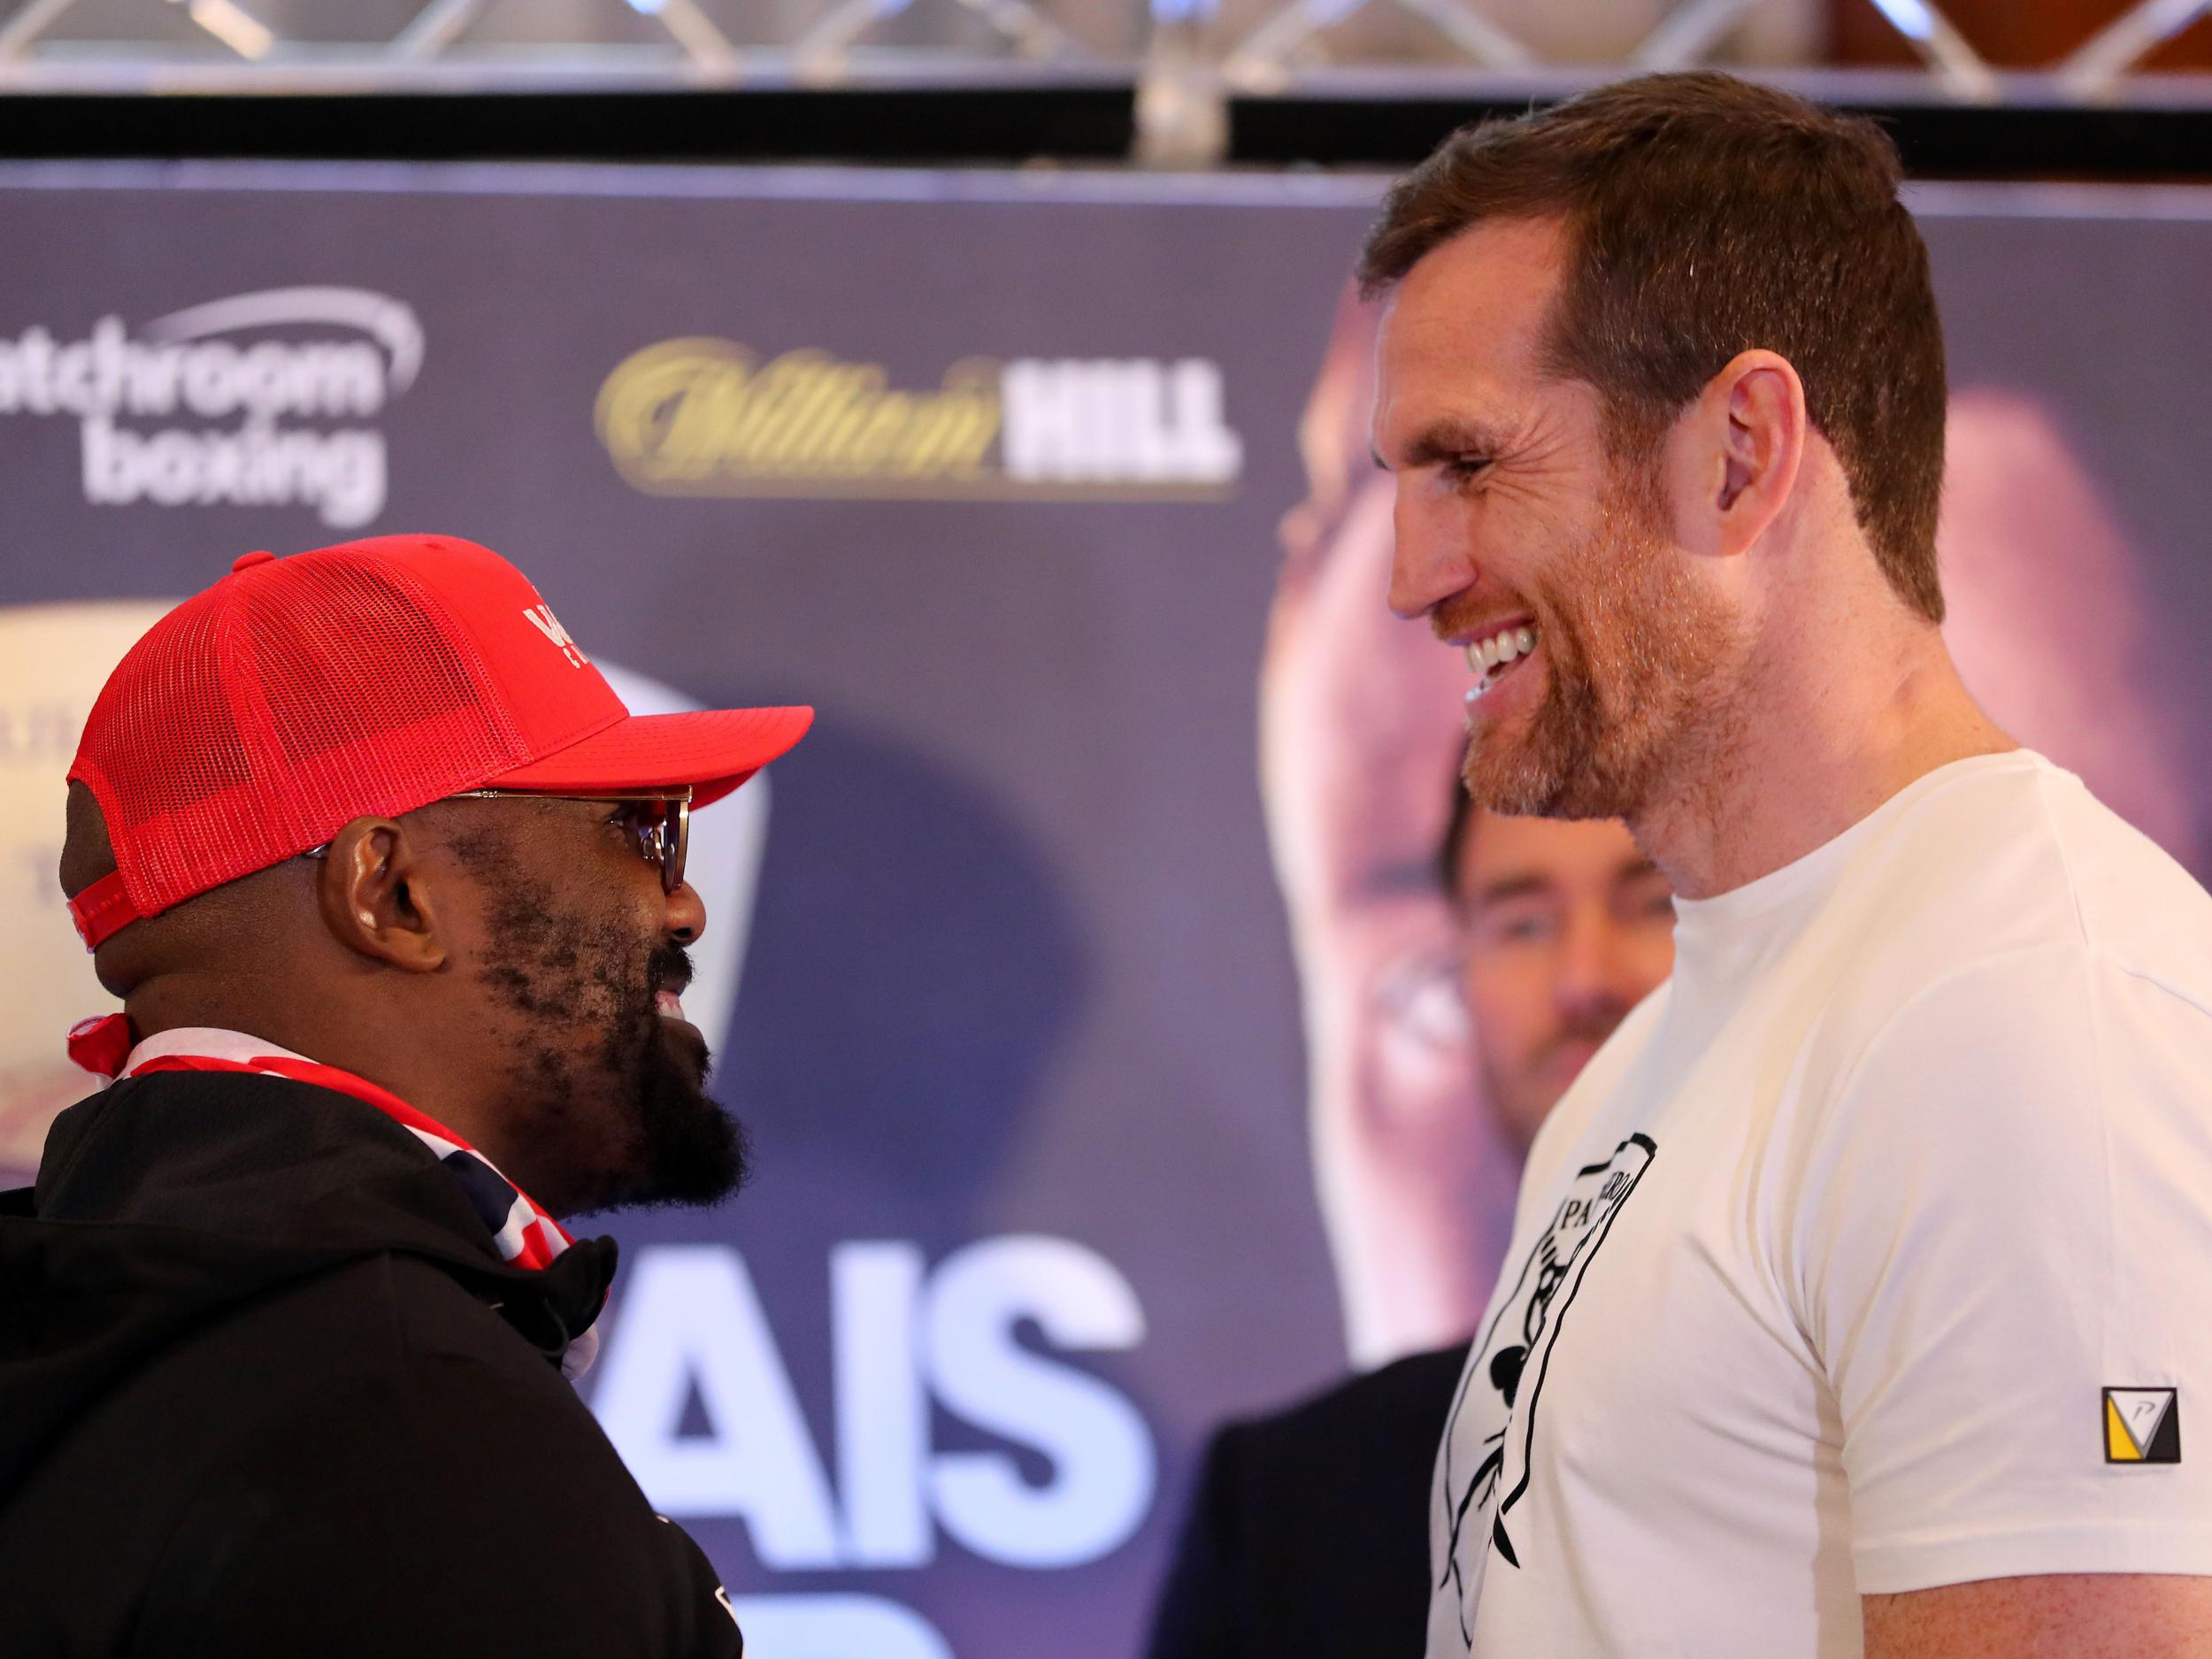 Dereck Chisora vs David Price live stream How to watch heavyweight clash online and on TV The Independent The Independent